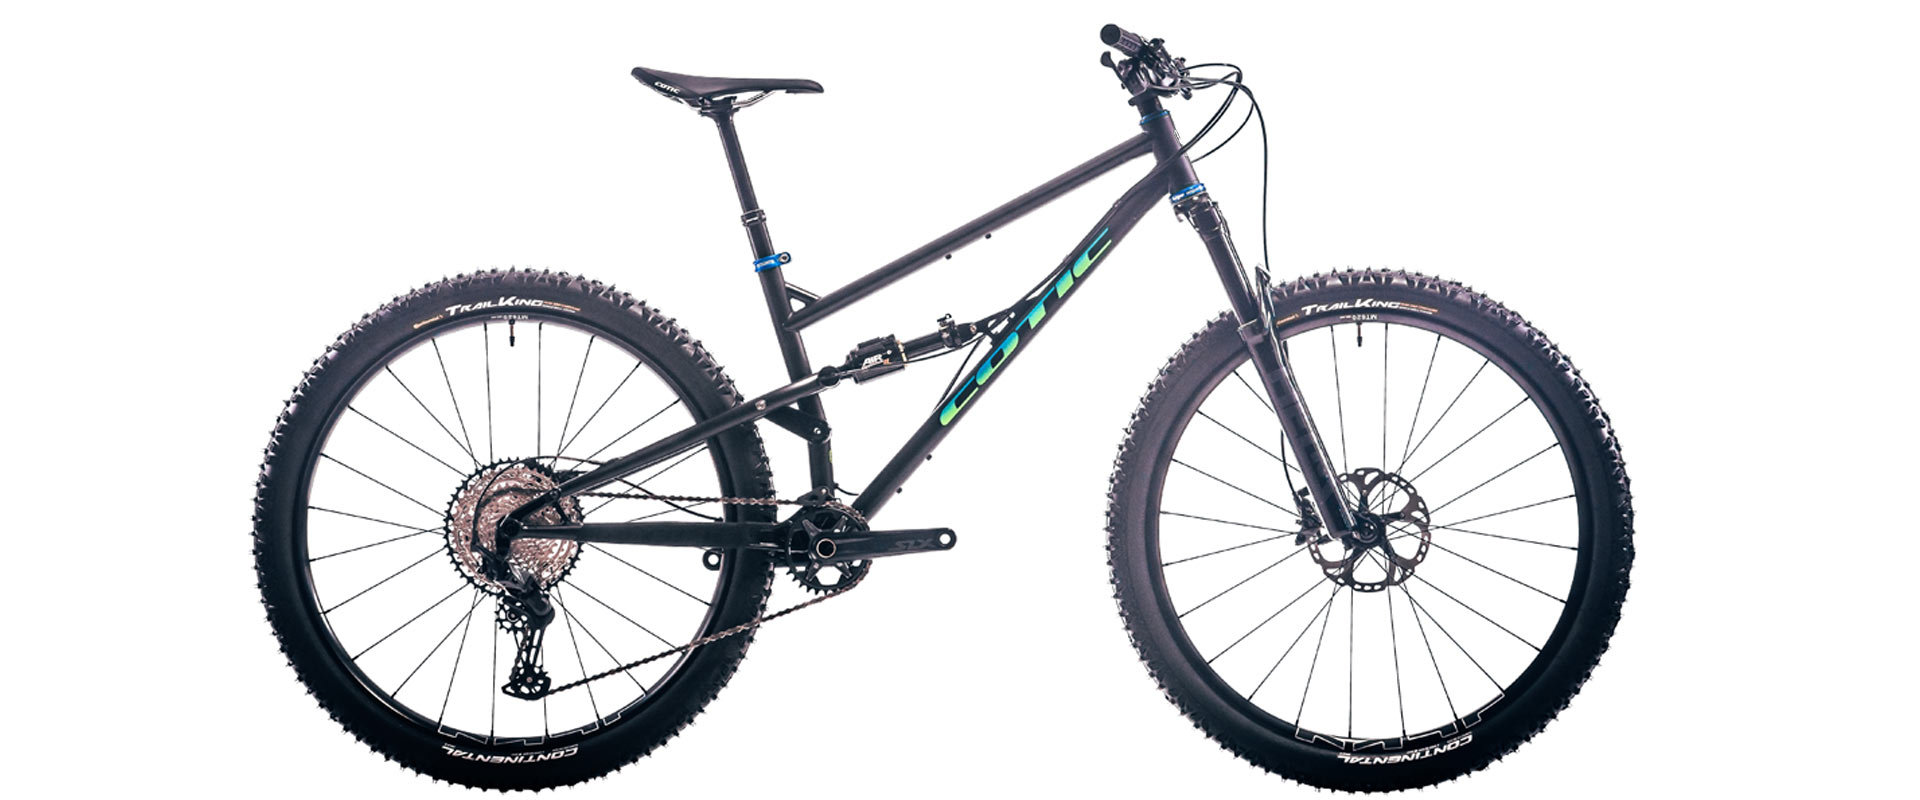 Cotic FlareMAX Gen4, Gristone Blue/Green Fade, short travel trail bike, downcountry, downcountry bike, 29er mountain bike, steel full suspension, reynolds 853, uk made, made in britain